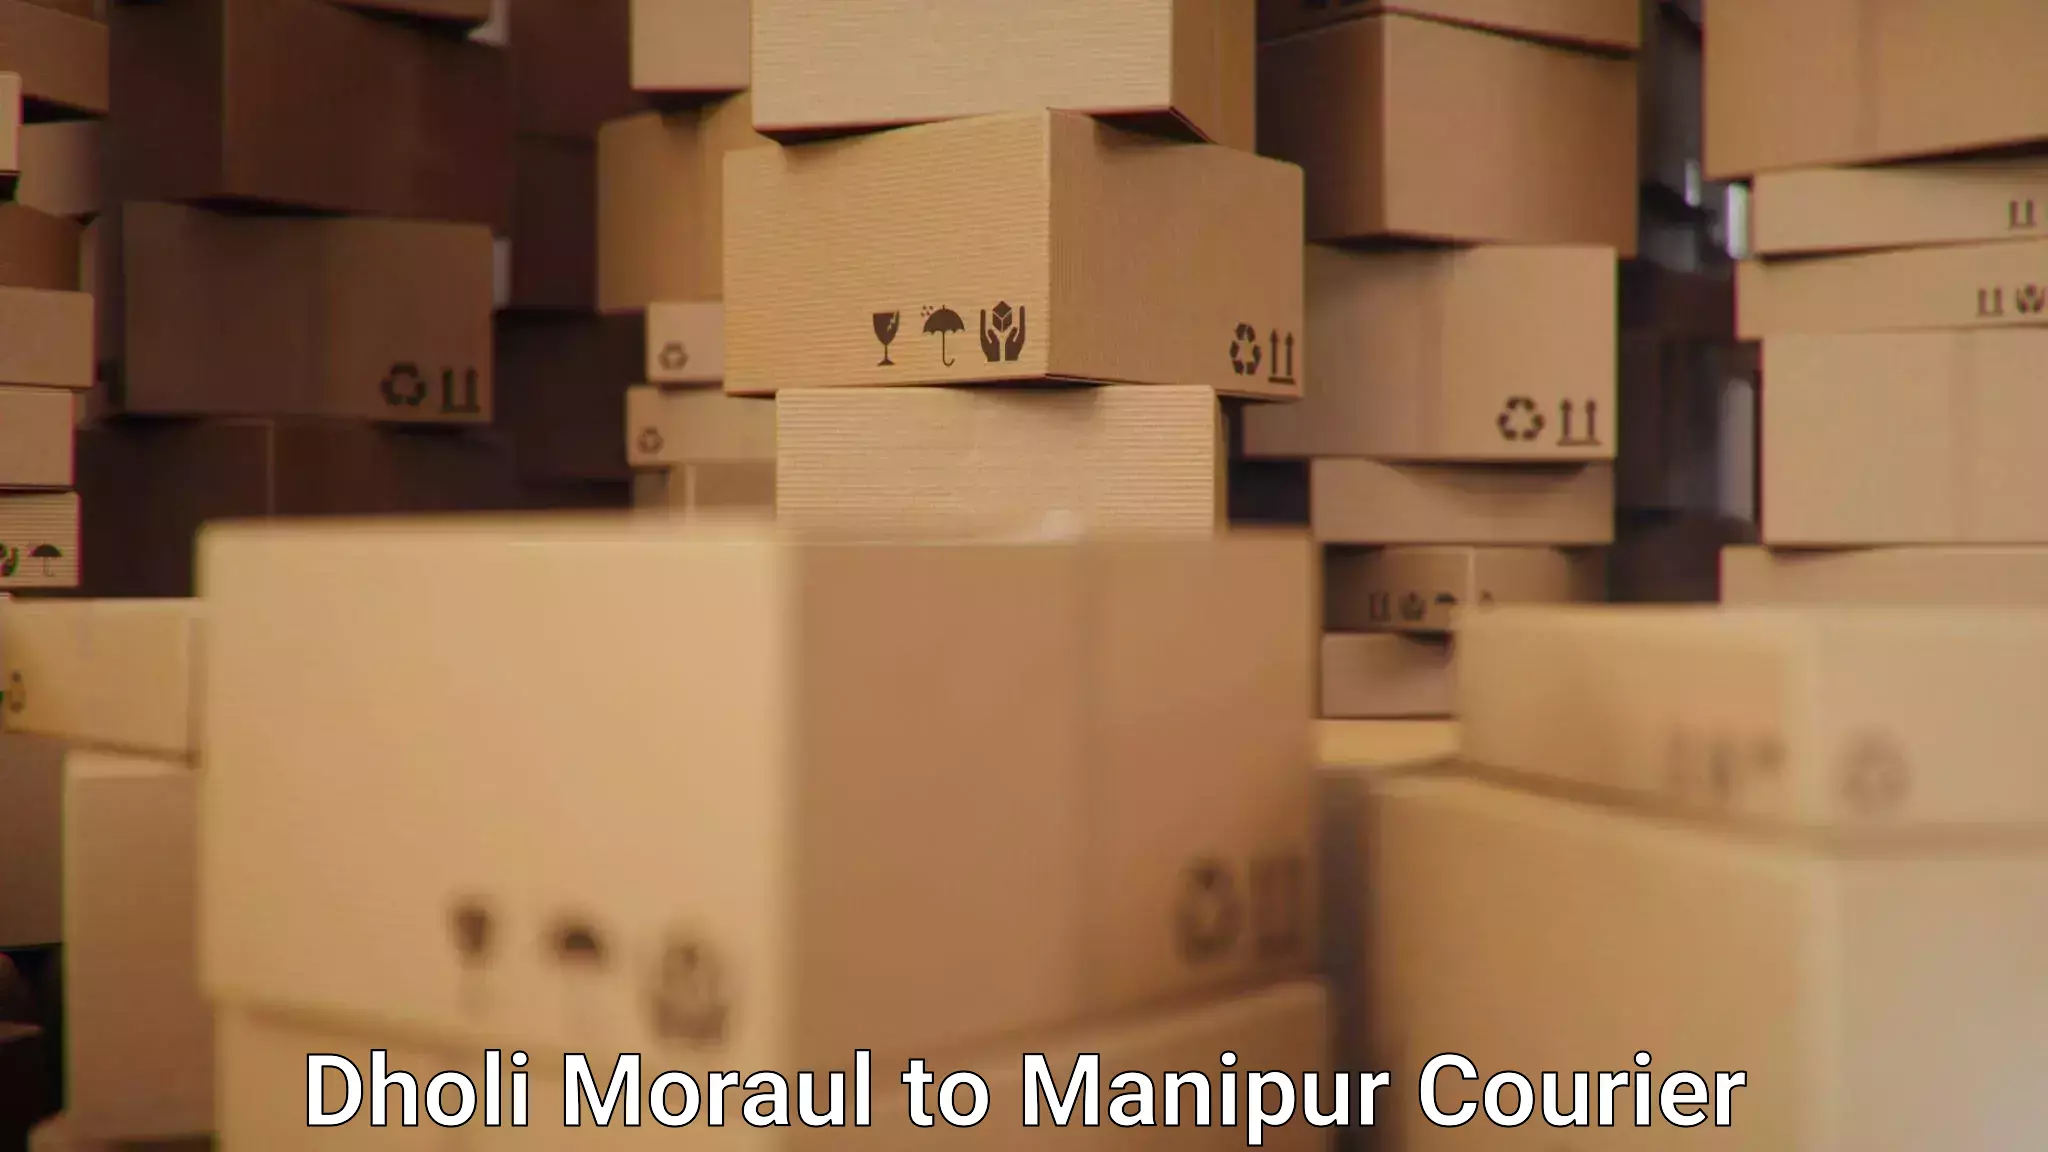 Professional courier services Dholi Moraul to Chandel